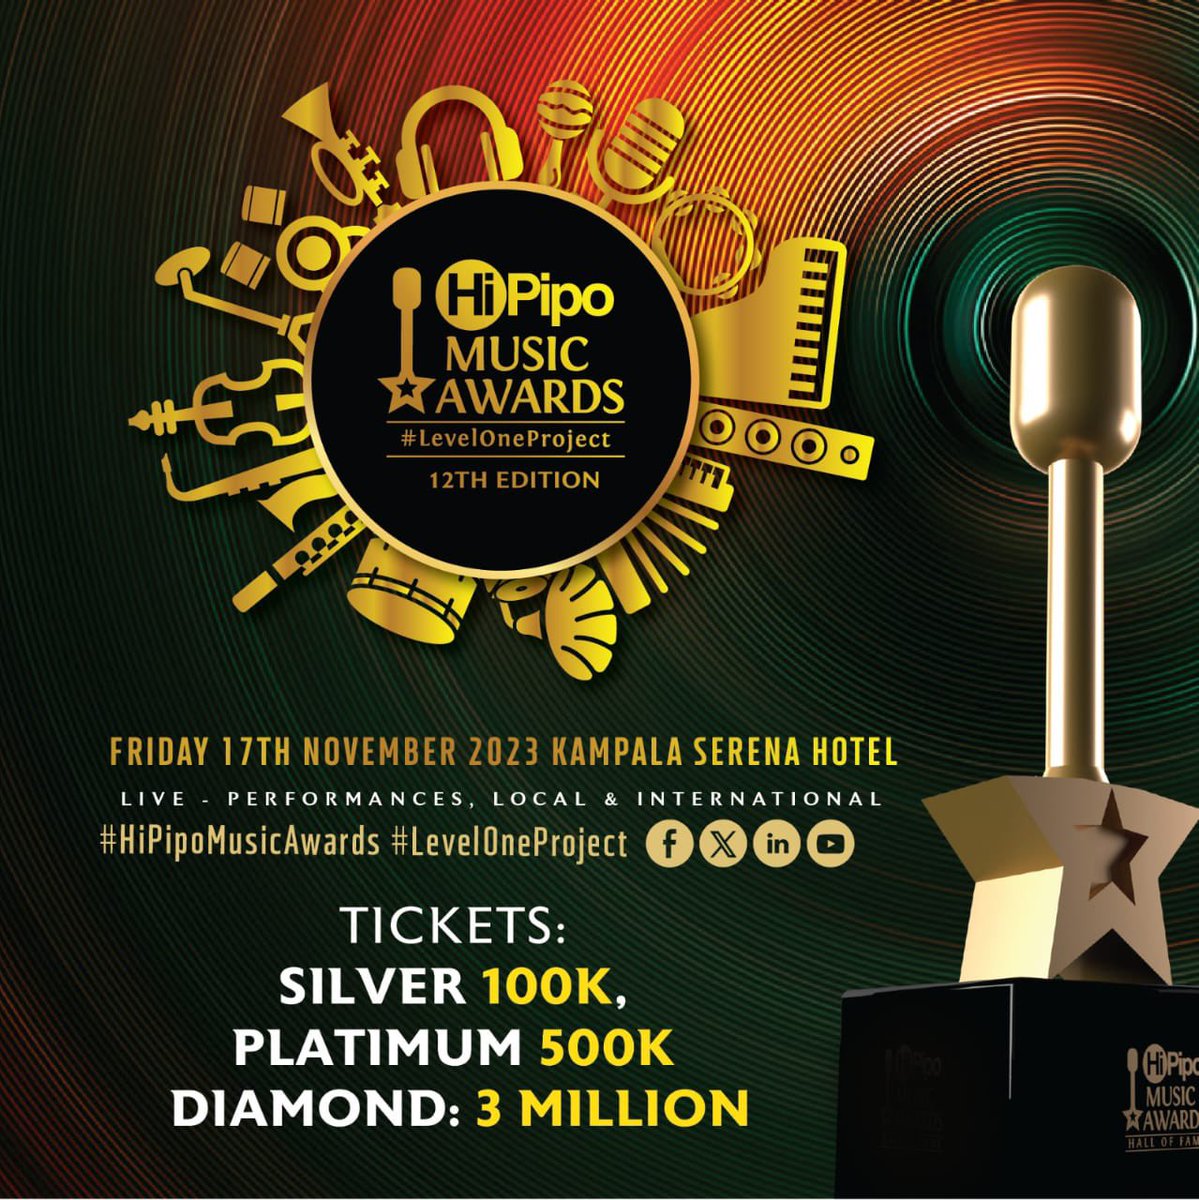 Only 2 days to the #HiPipoMusicAwards at Kampala Serena Hotel a night of glam, vibes and music that you won’t forget 

Book your ticket / tables as early as now at the Jude_Color show room , HiPipo
OR Online via : mticket.252.co.ug

#LevelOneProject